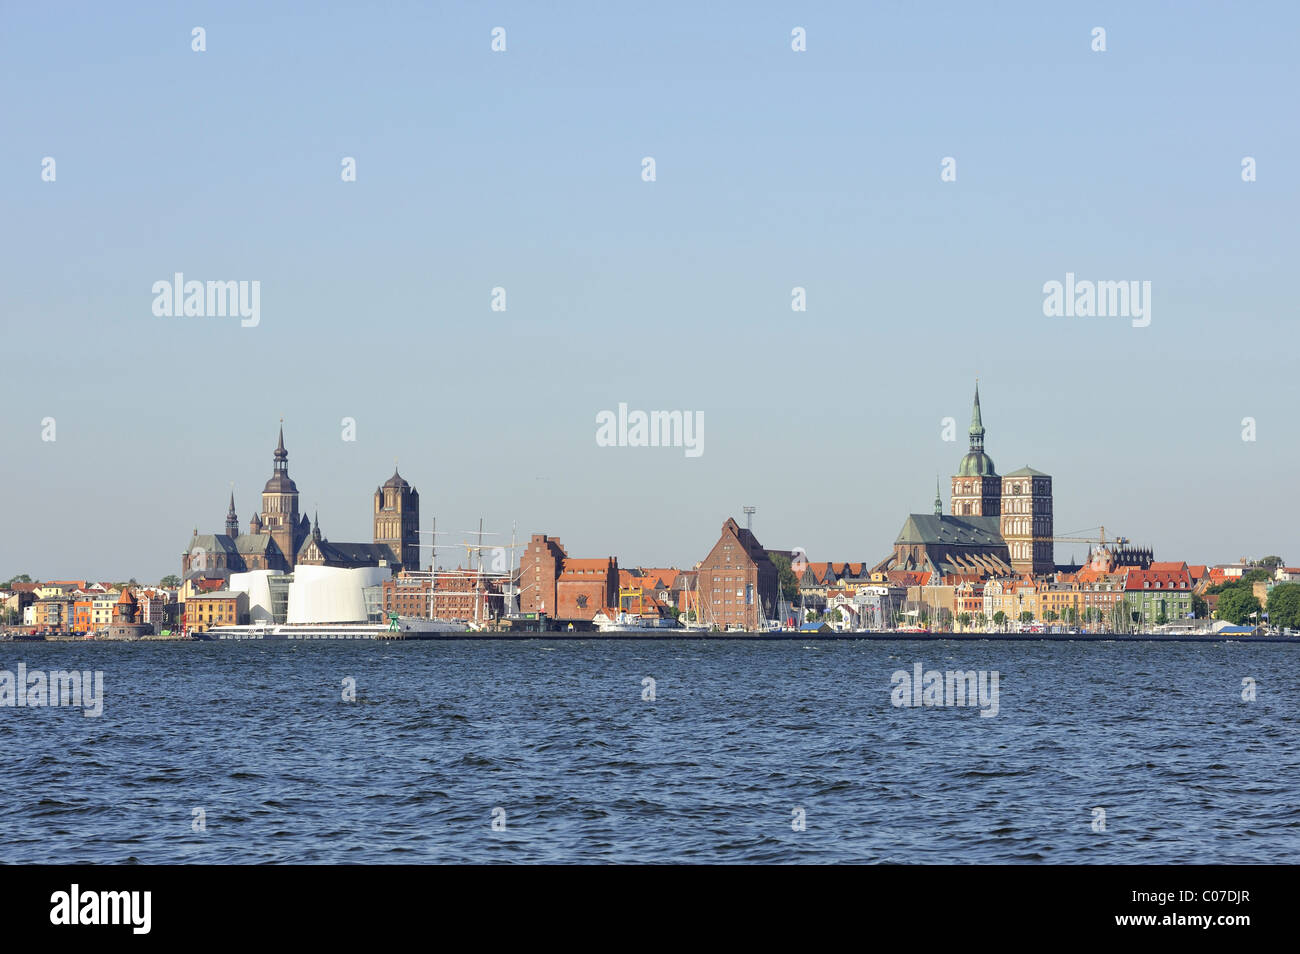 View from Ruegen island over the Strelasund sound on the skyline of the Hanseatic city of Stralsund Stock Photo